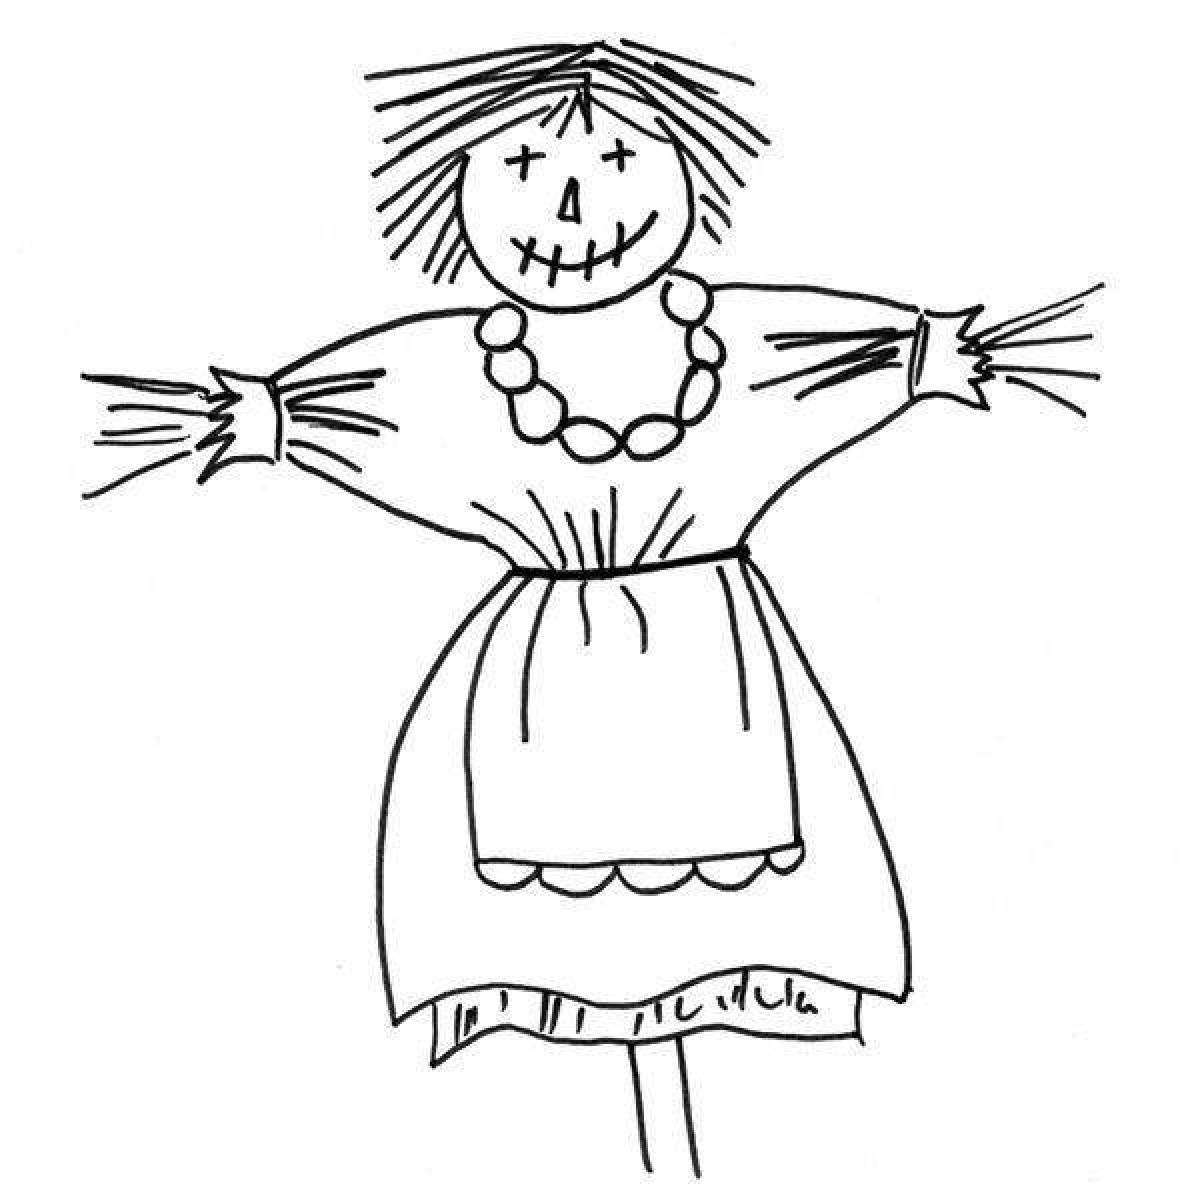 Carnival coloring book with colorful scarecrows